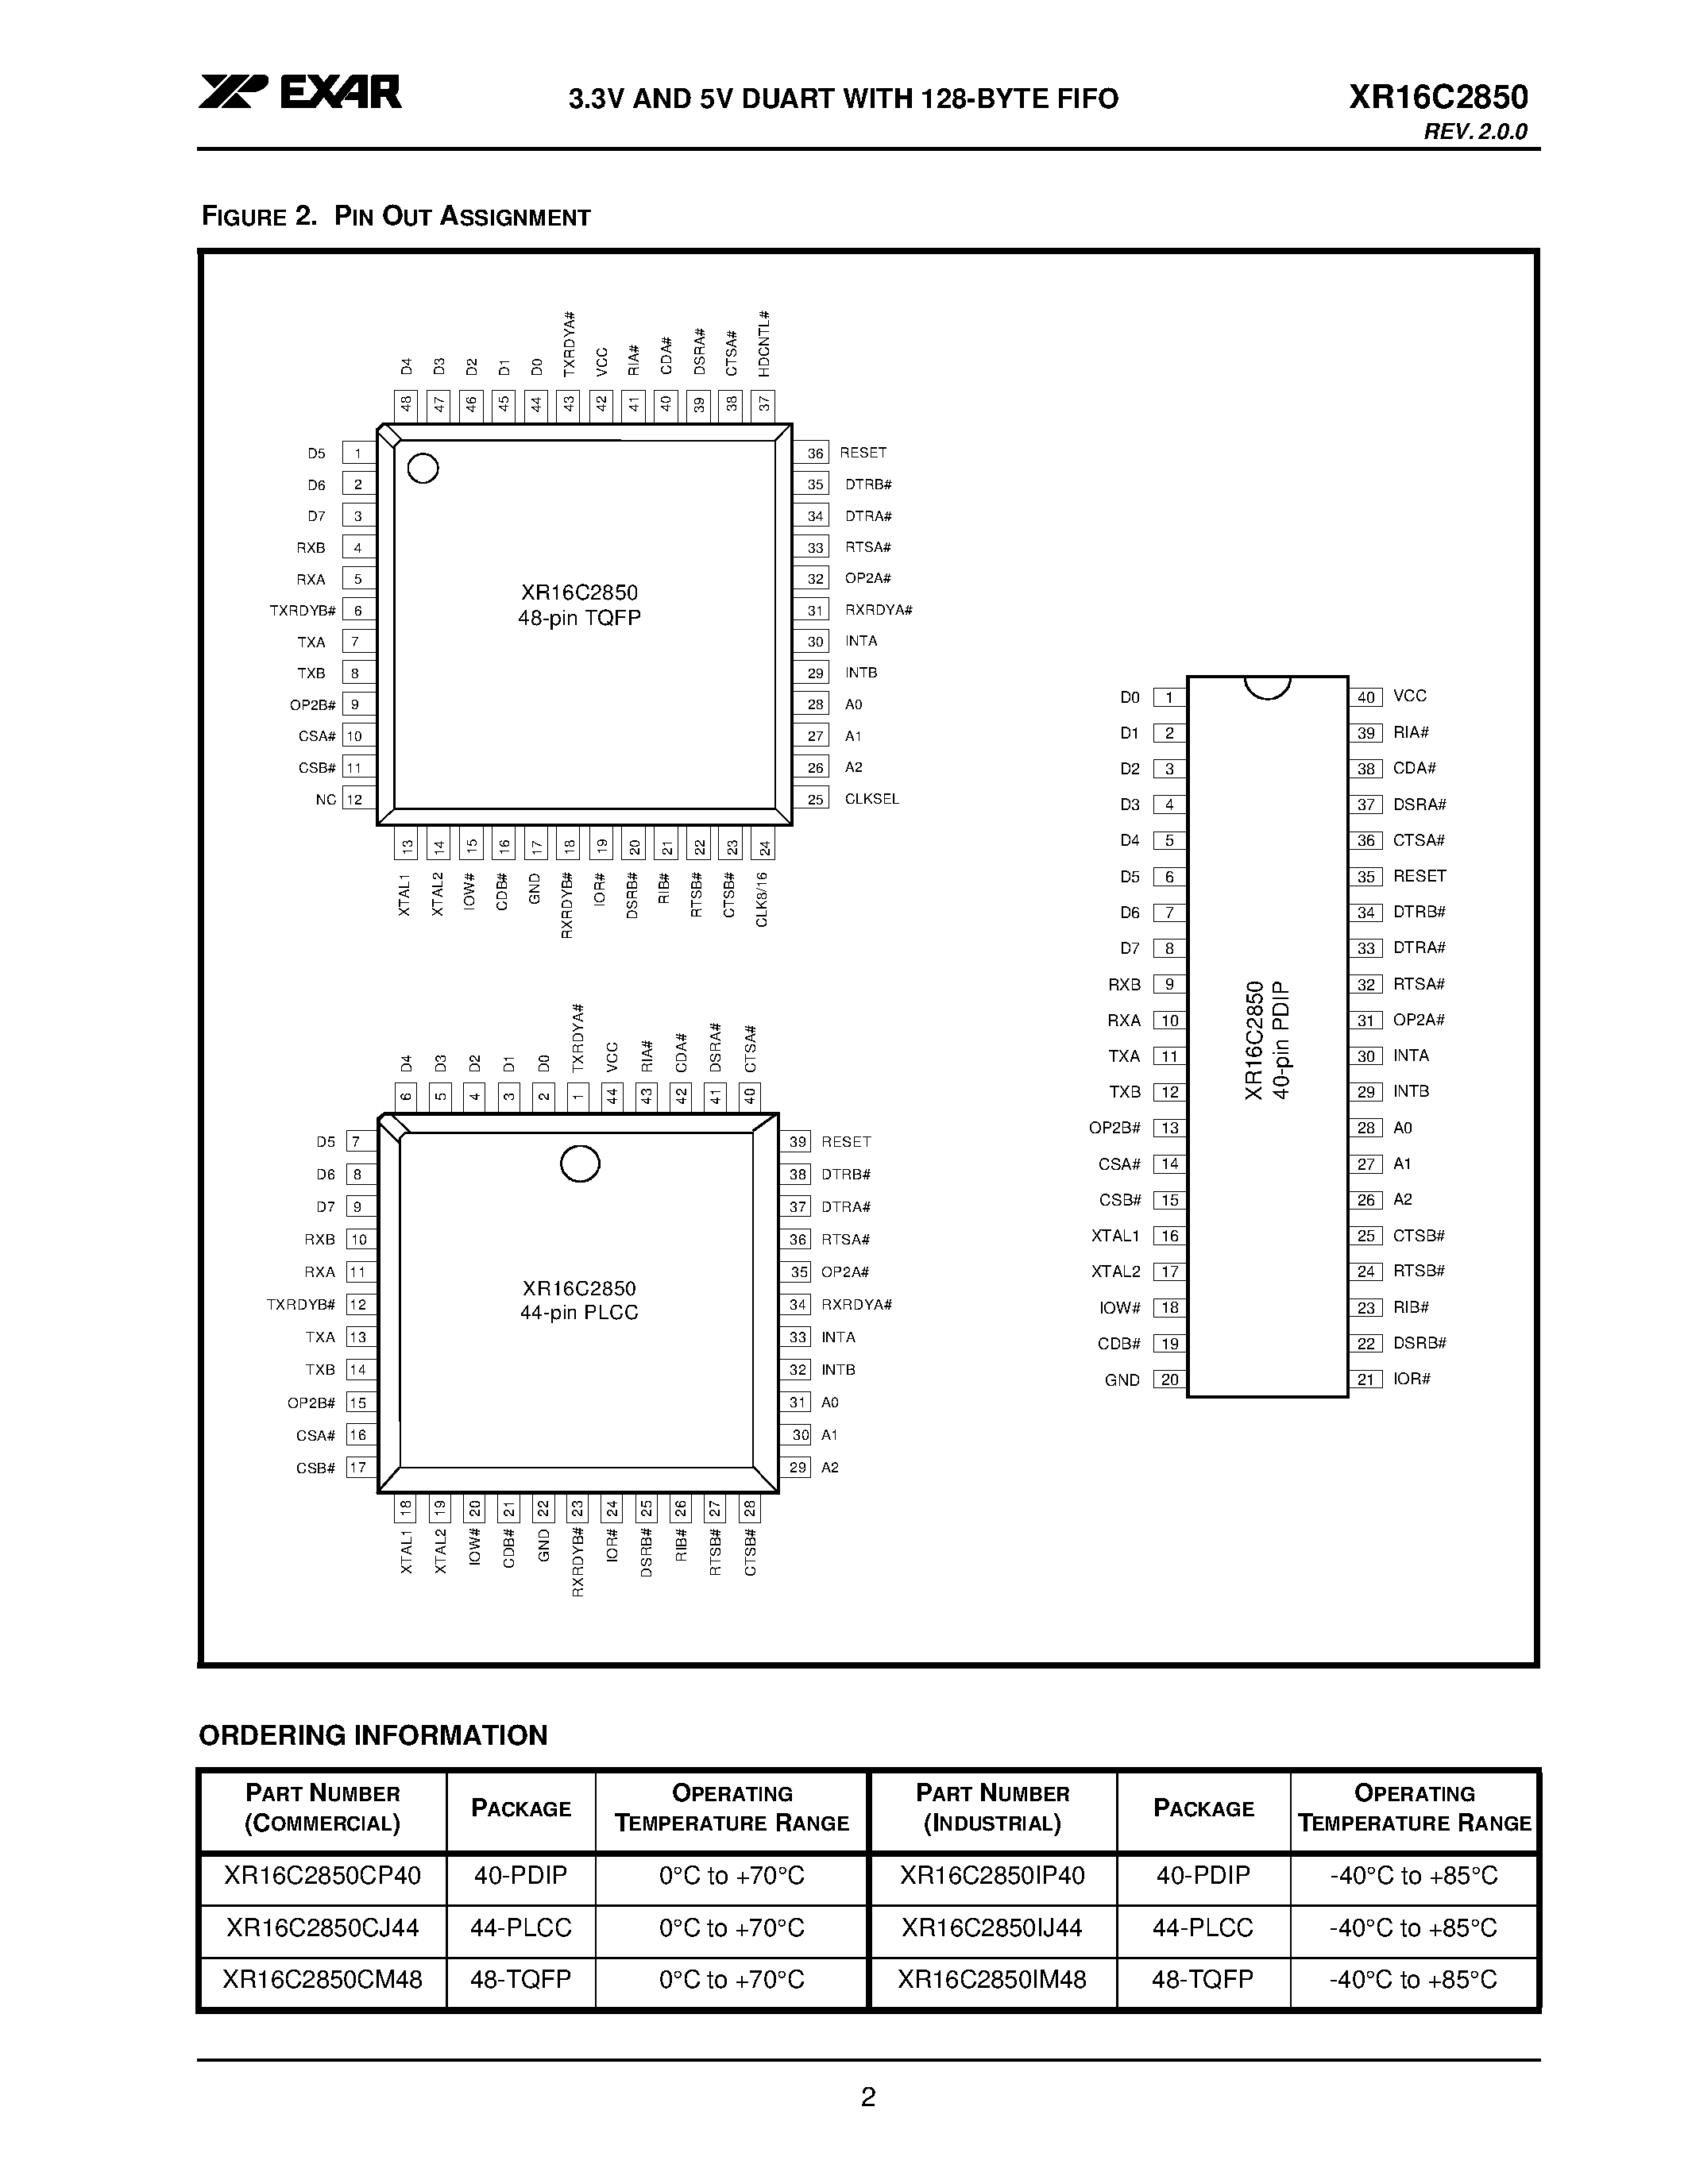 Datasheet XR16C2850IM48 - 3.3V AND 5V DUART WITH 128-BYTE FIFO page 2